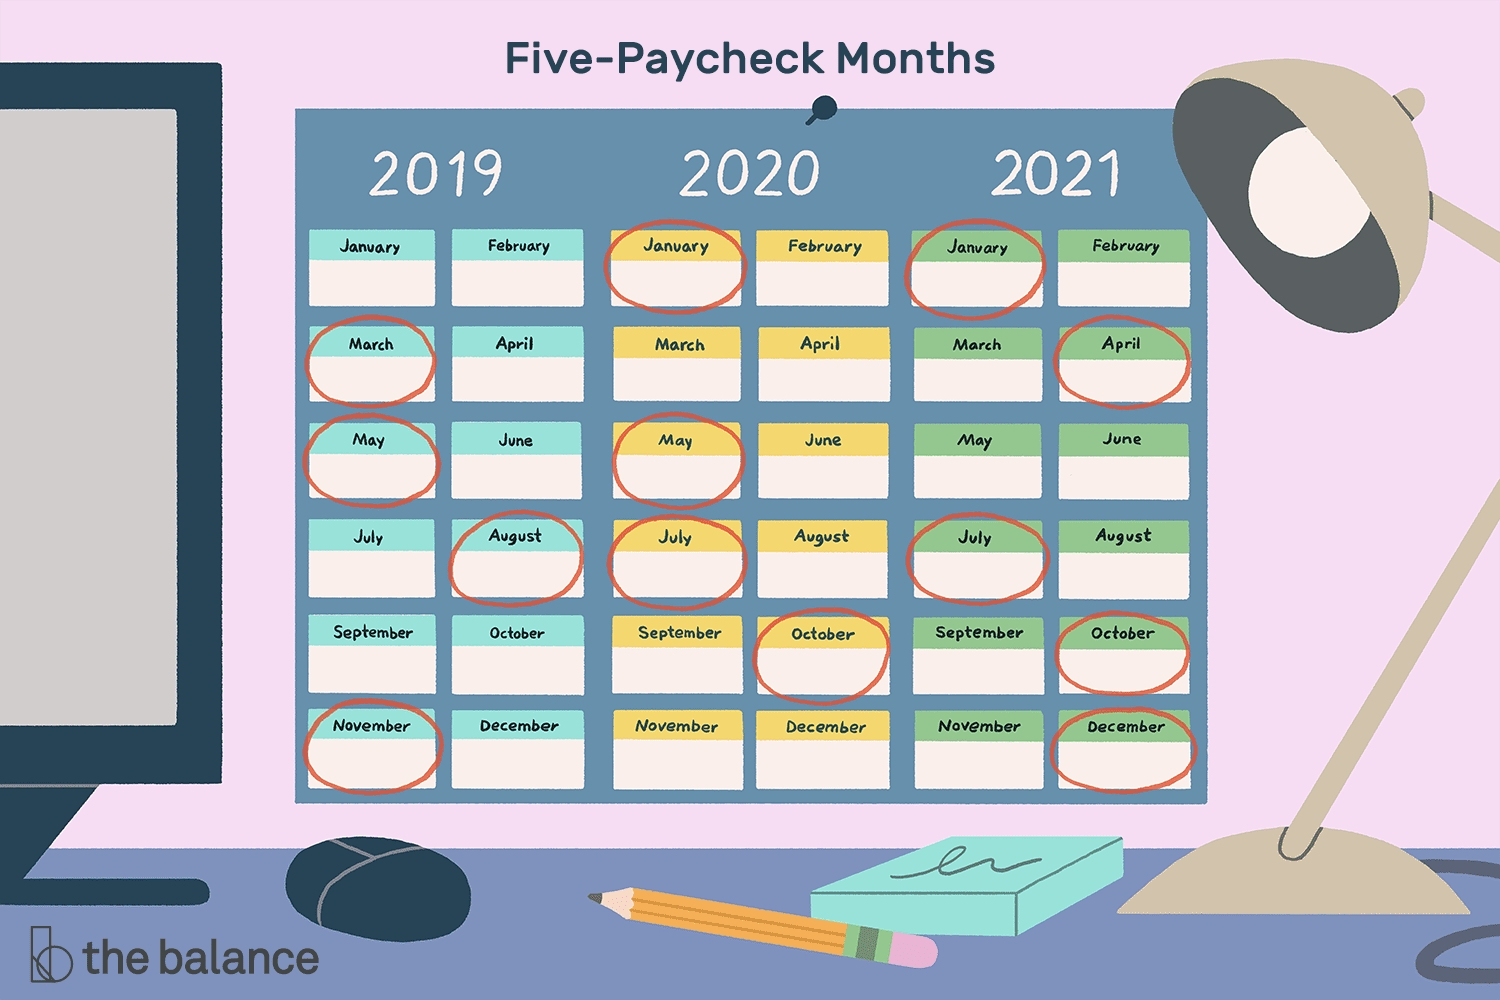 Months In Which You Receive 5 Paychecks From 2019-2029  Fortnights In 2021 Financial Year